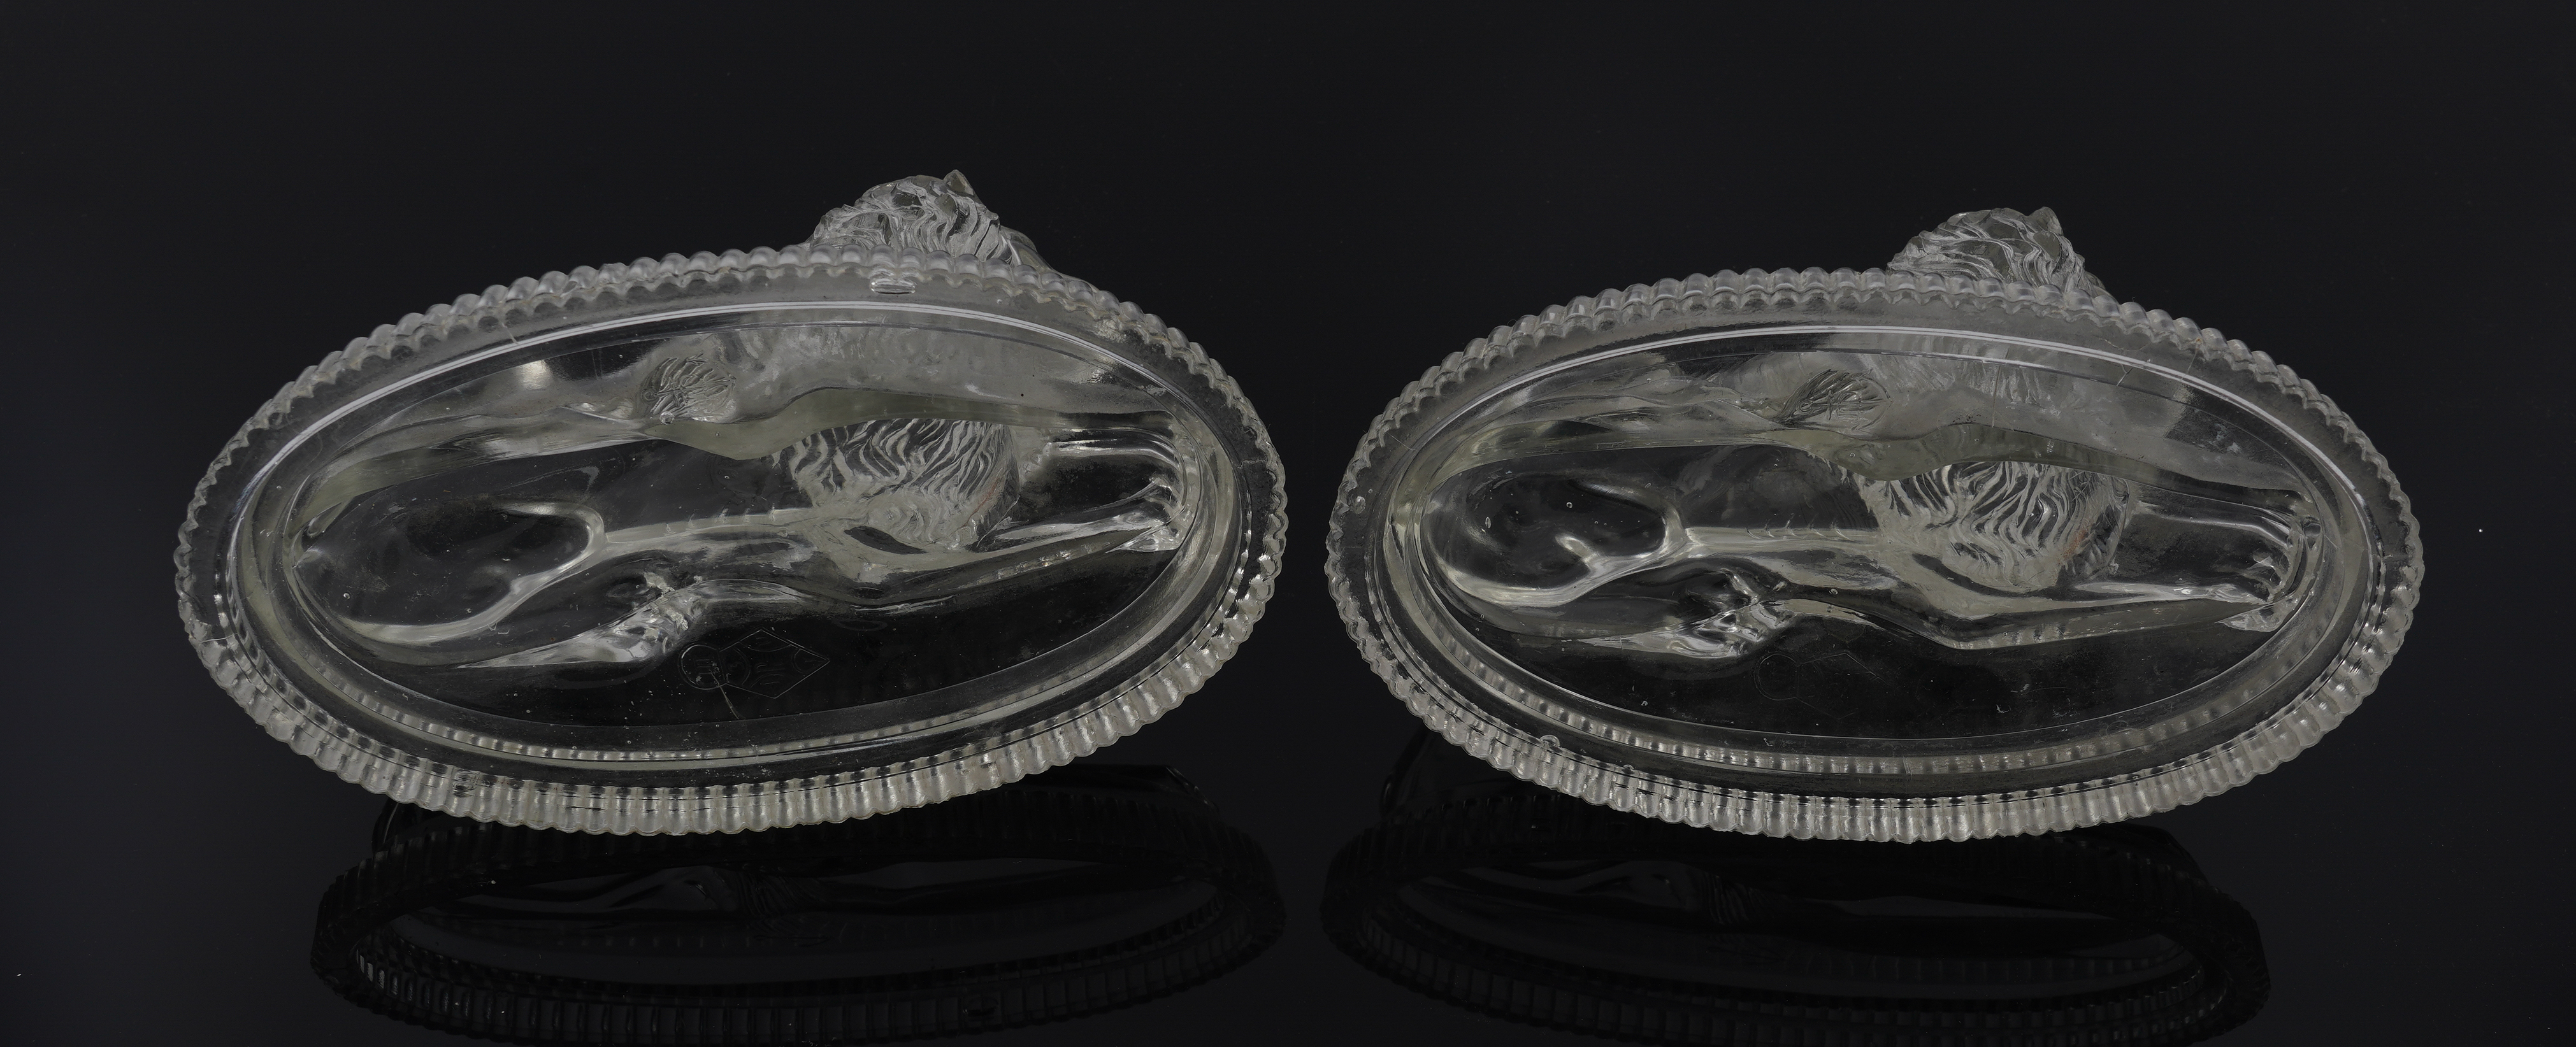 JOHN DERBYSHIRE: A PAIR OF VICTORIAN PRESSED GLASS RECUMBENT LIONS (2) - Image 4 of 4